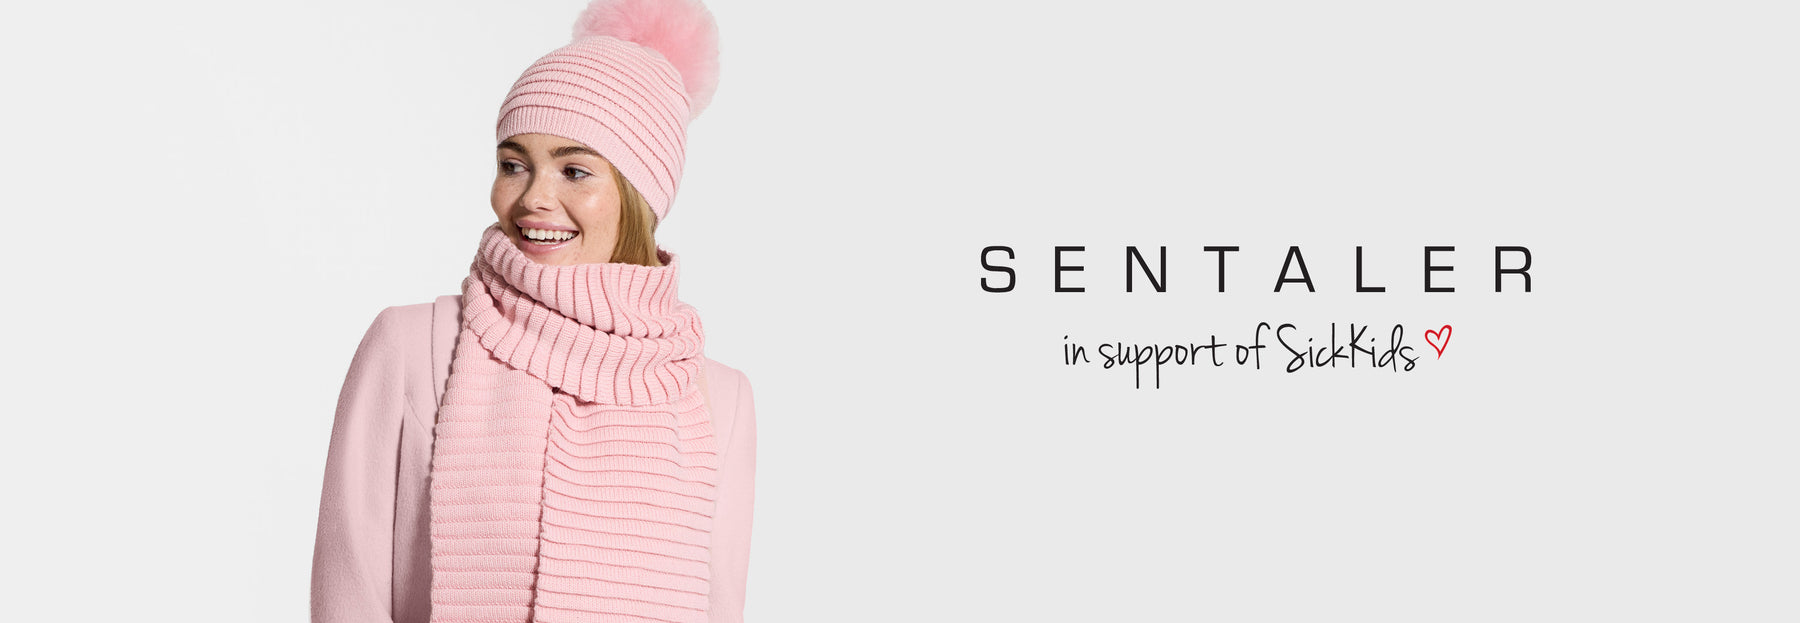 Sentaler Adult Ribbed Hat With Oversized Fur Pompon and Ribbed Scarf featured in Baby Alpaca and available in Pink. Seen from front on model.